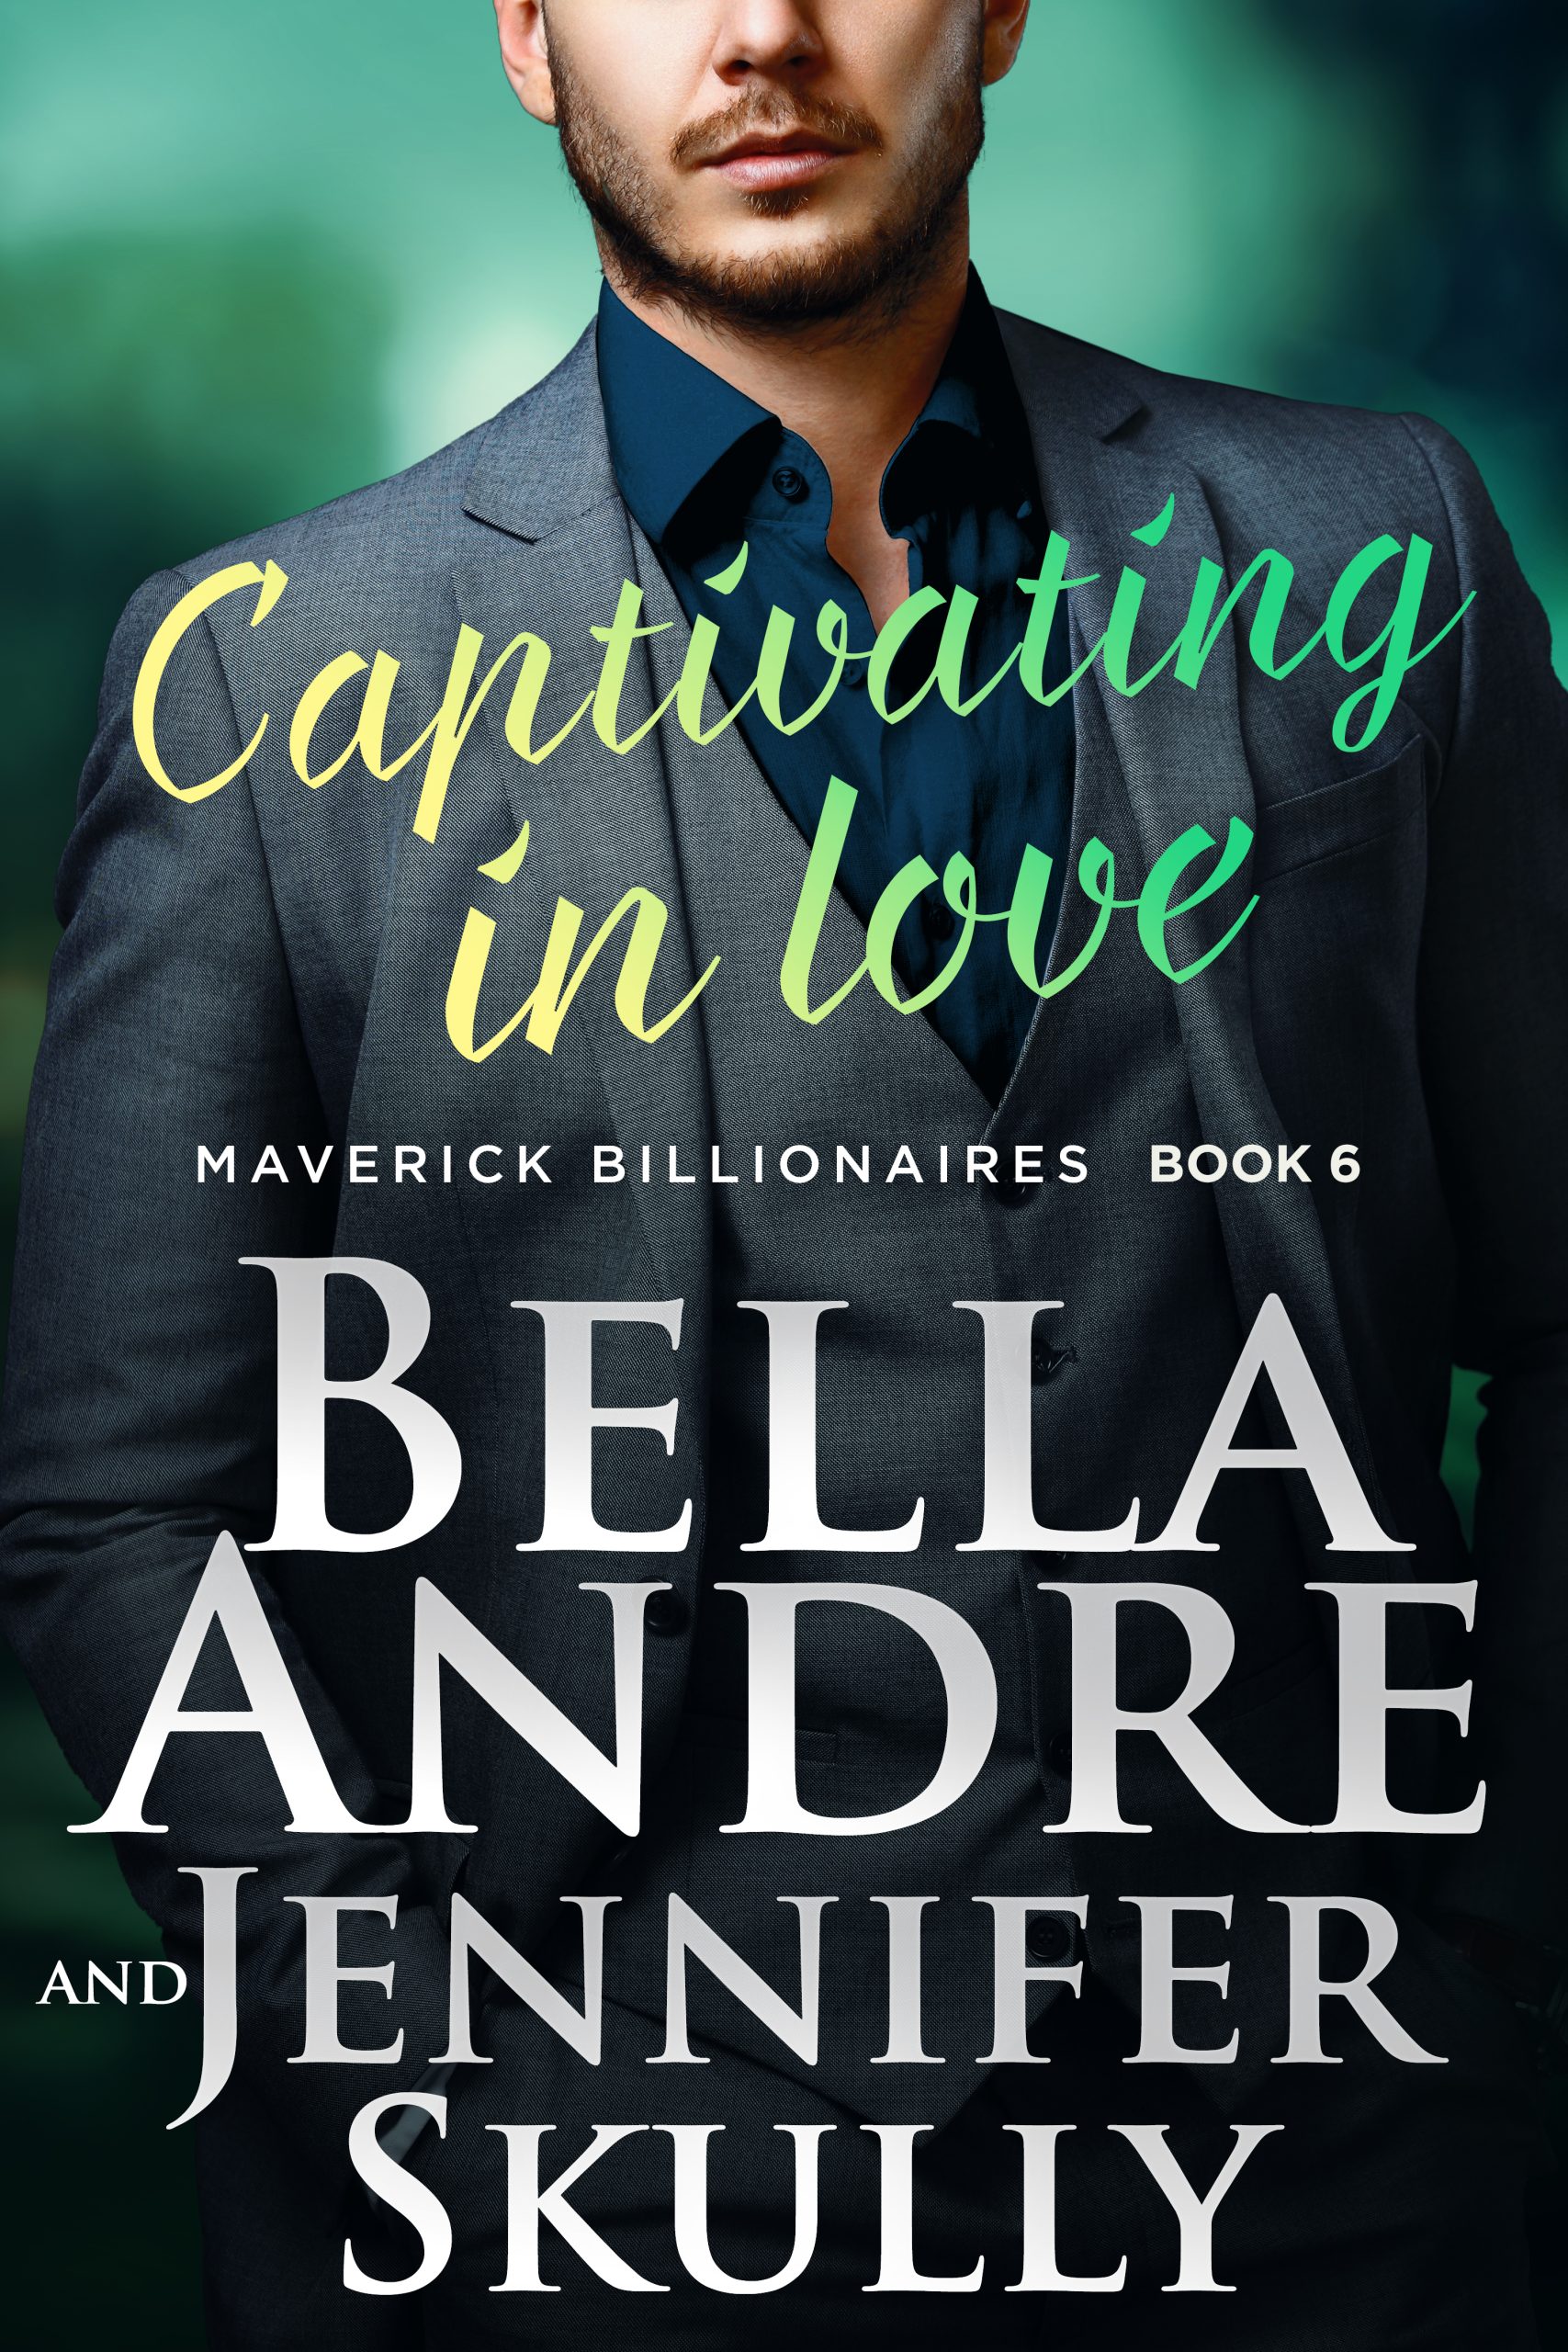 Cover of Captivating in Love - Maverick Billionaires Book 6 - by Bella Andre and Jennifer Skully